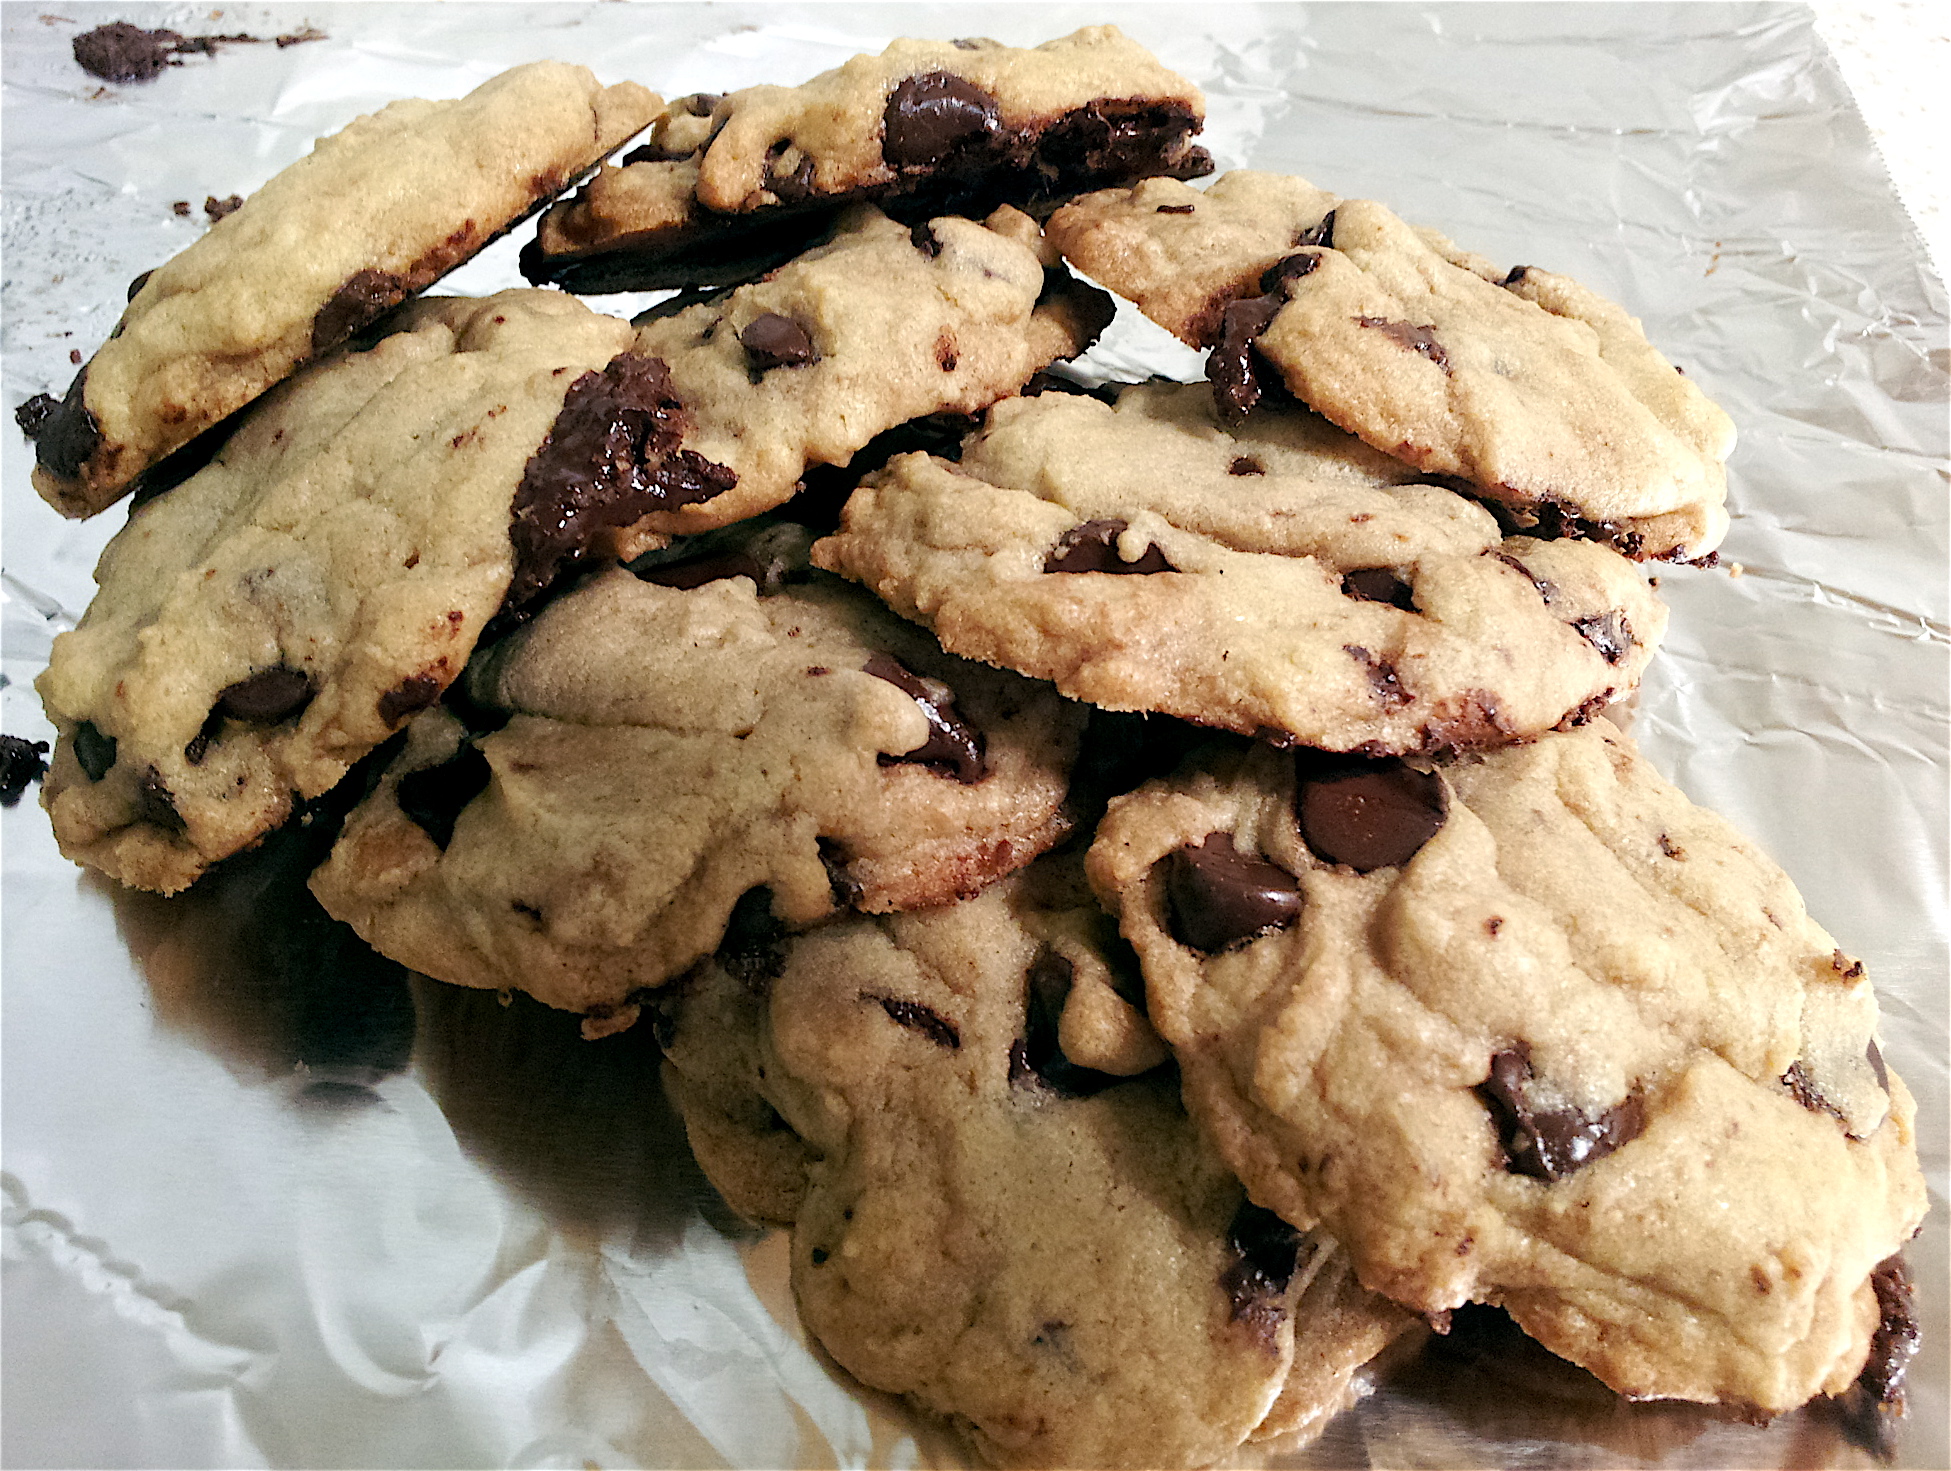 Wednesday: Crisp and Chewy Chocolate Chunk Cookies